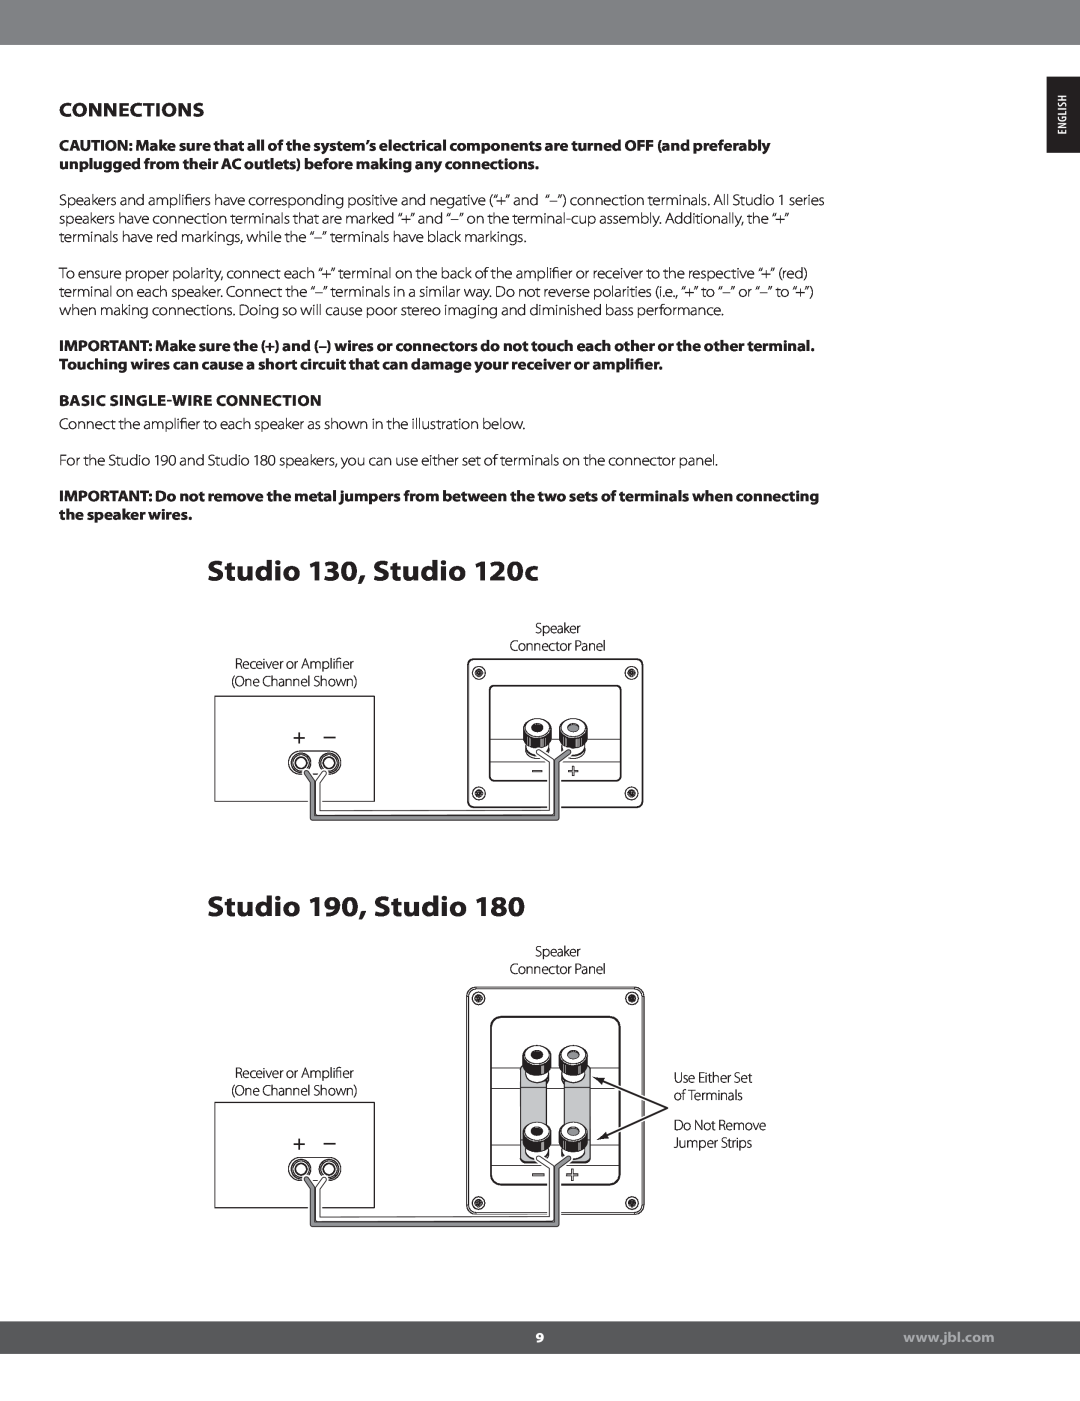 JBL STUDIO180 manual Studio 130, Studio 120c, Studio 190, Studio, Connections, Basic Singlewire Connection 